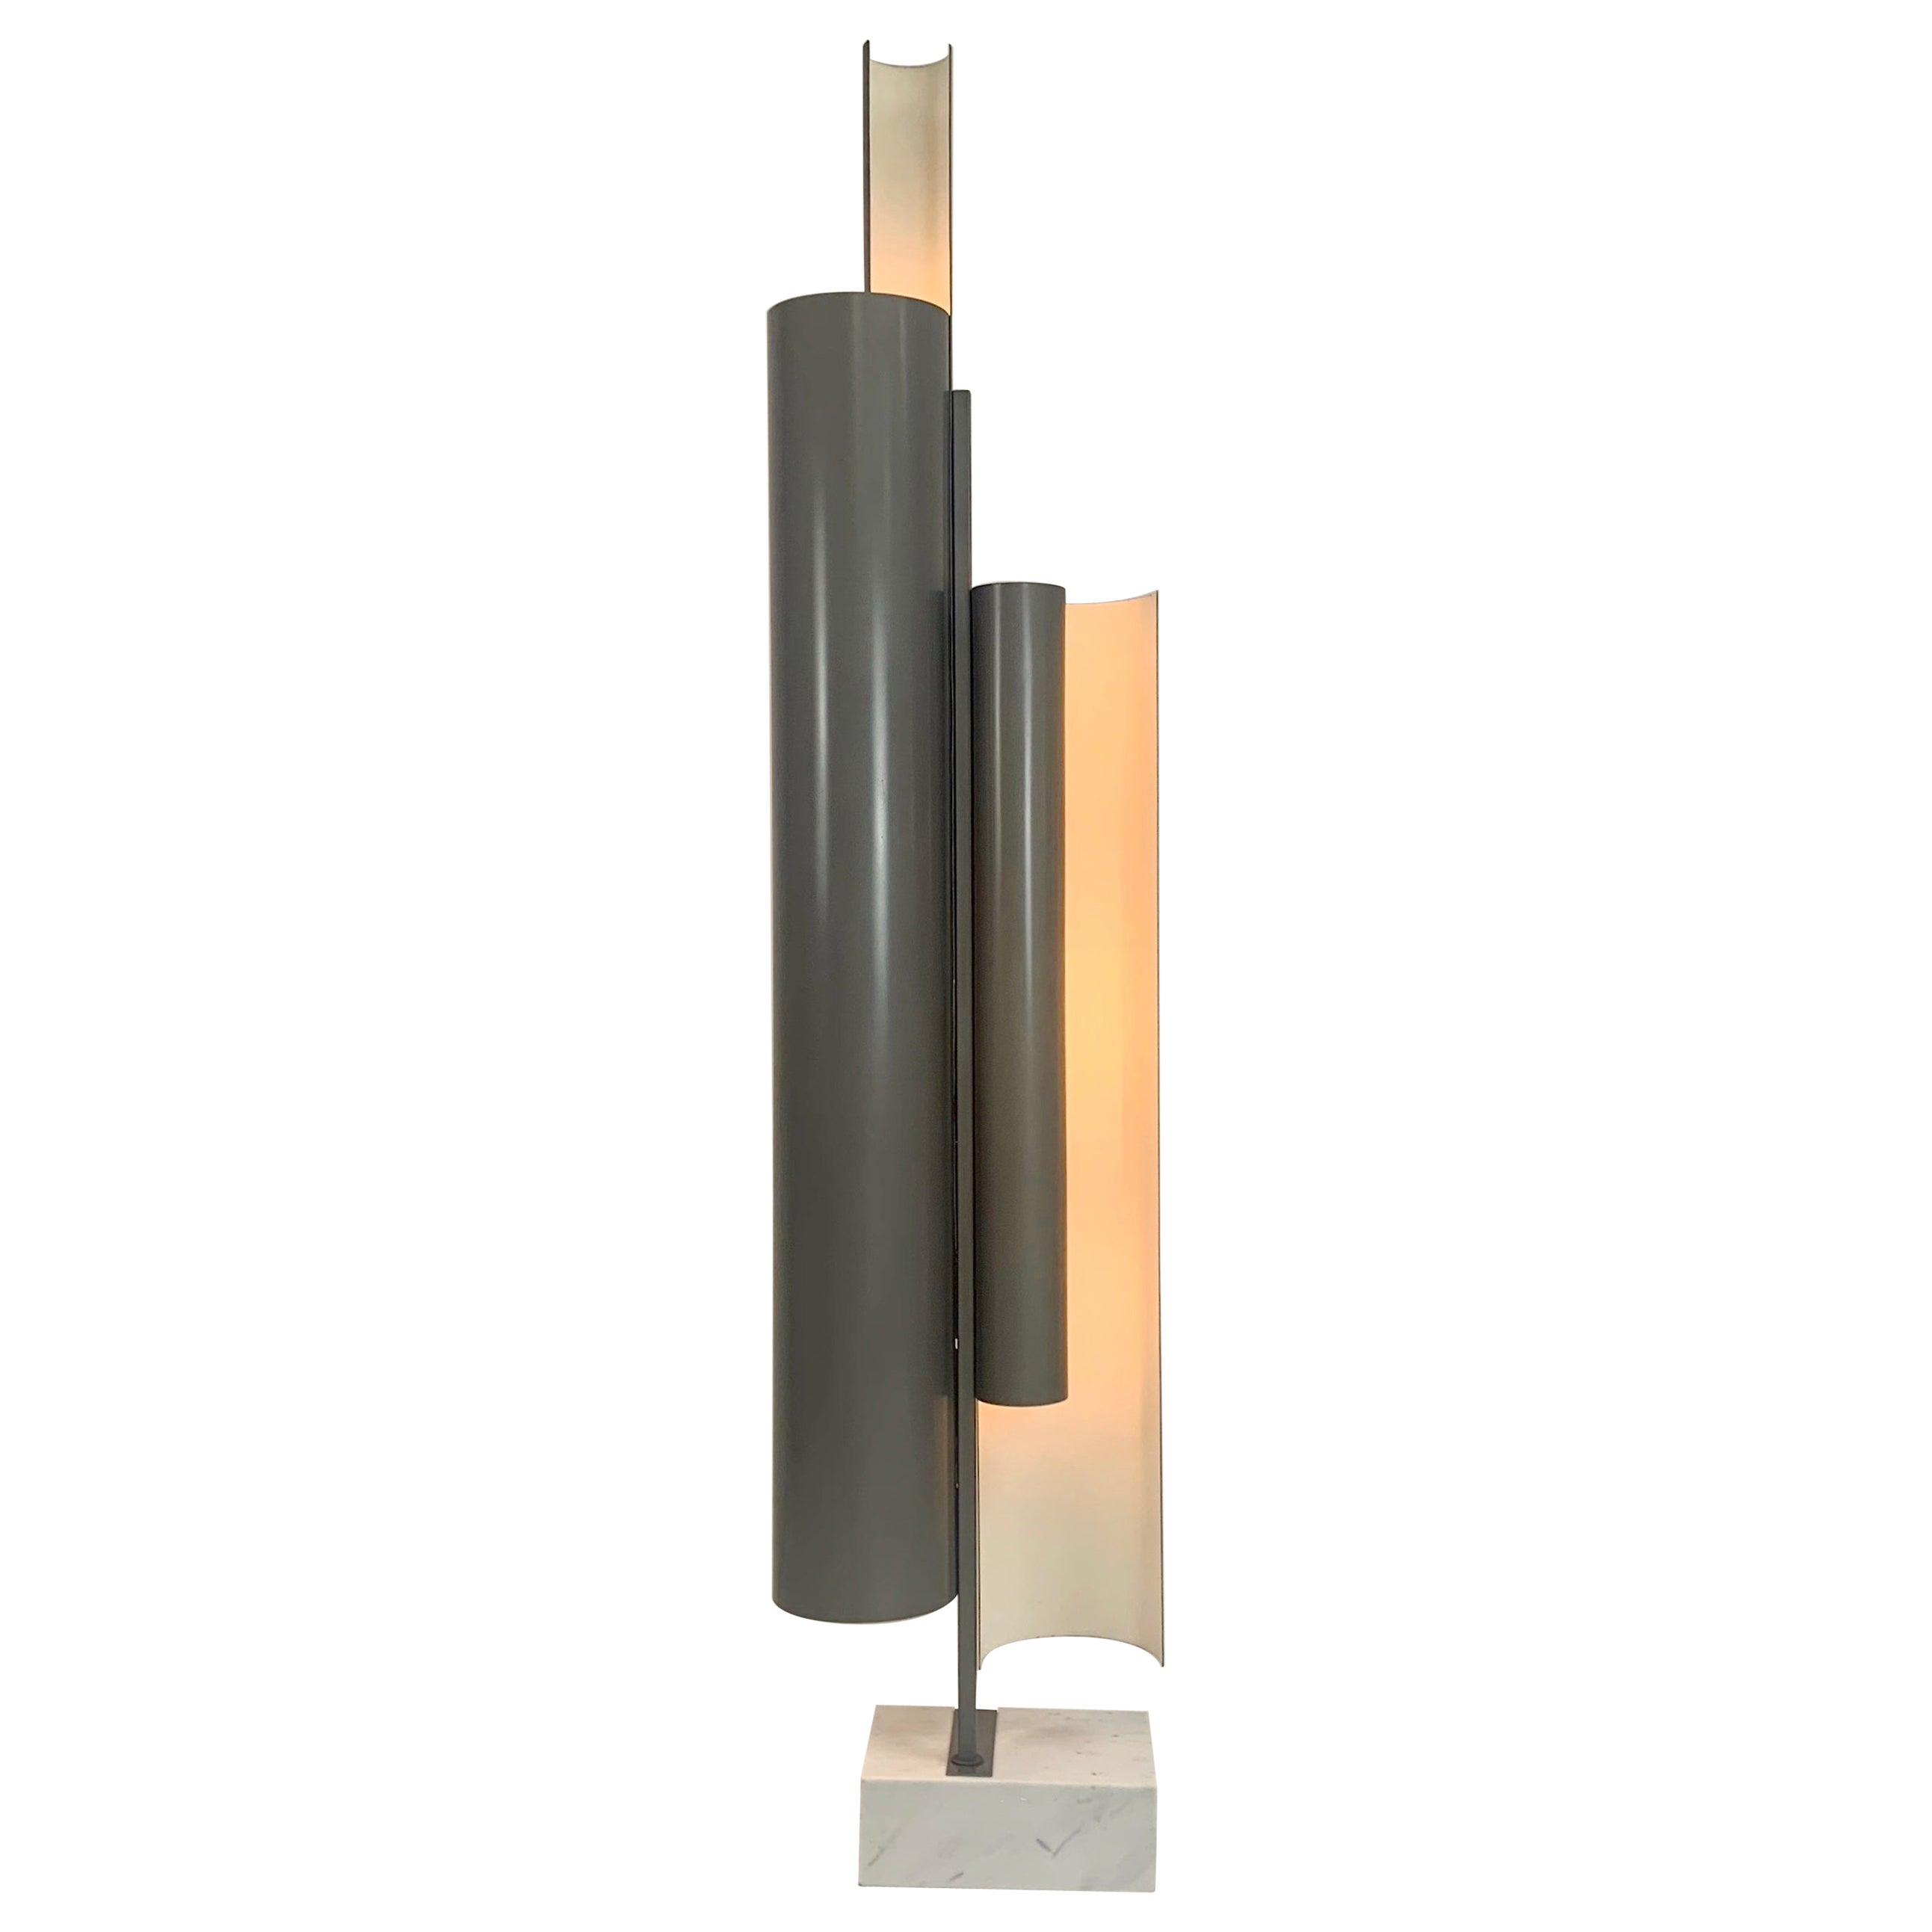 Impressive floor lamp by Pia Crippa Guidetti for Lumi, circa 1970, Italy.
Lacquered aluminum, metal, marble.
Dimensions: 203 cm H, 44 cm W, 26 cm D.
Two switches, 6 E27 bulbs .
Rare model in is original condition.
All purchases are covered by our